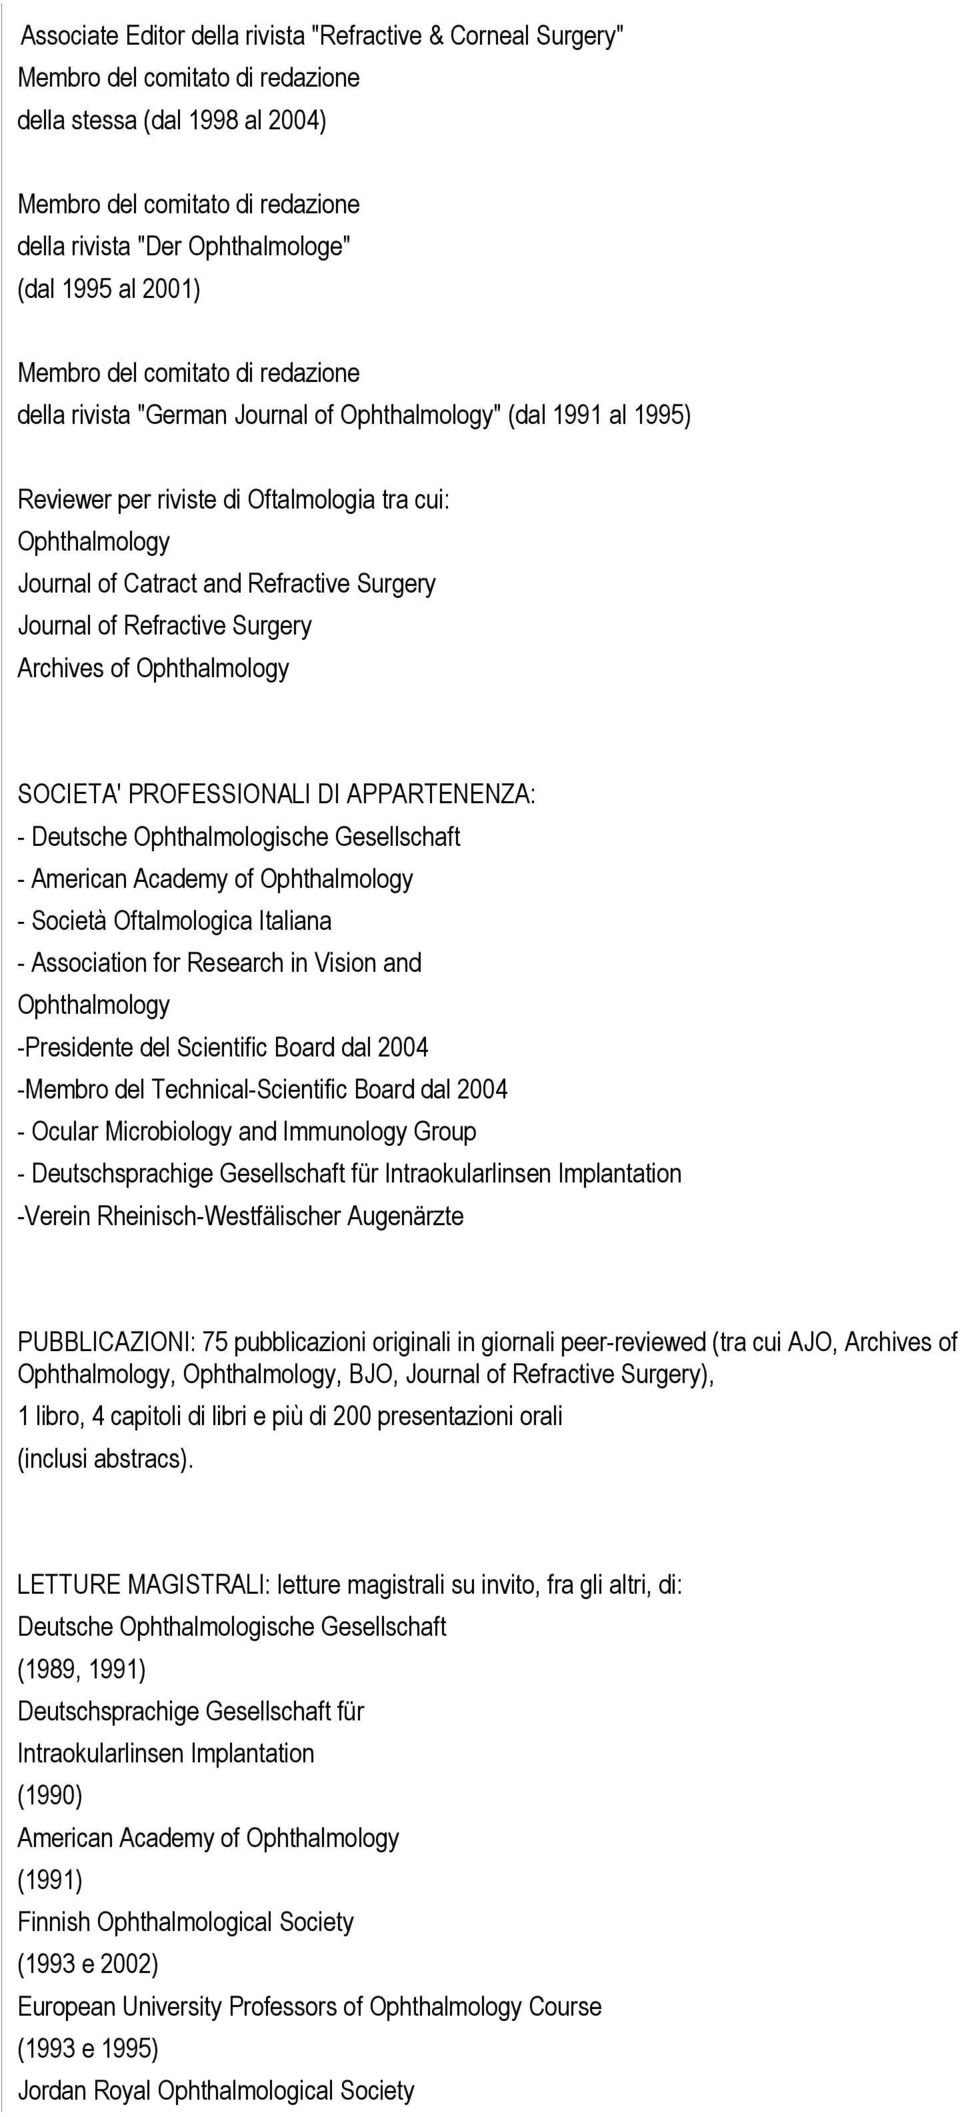 APPARTENENZA: - Deutsche Ophthalmologische Gesellschaft - American Academy of Ophthalmology - Società Oftalmologica Italiana - Association for Research in Vision and Ophthalmology -Presidente del